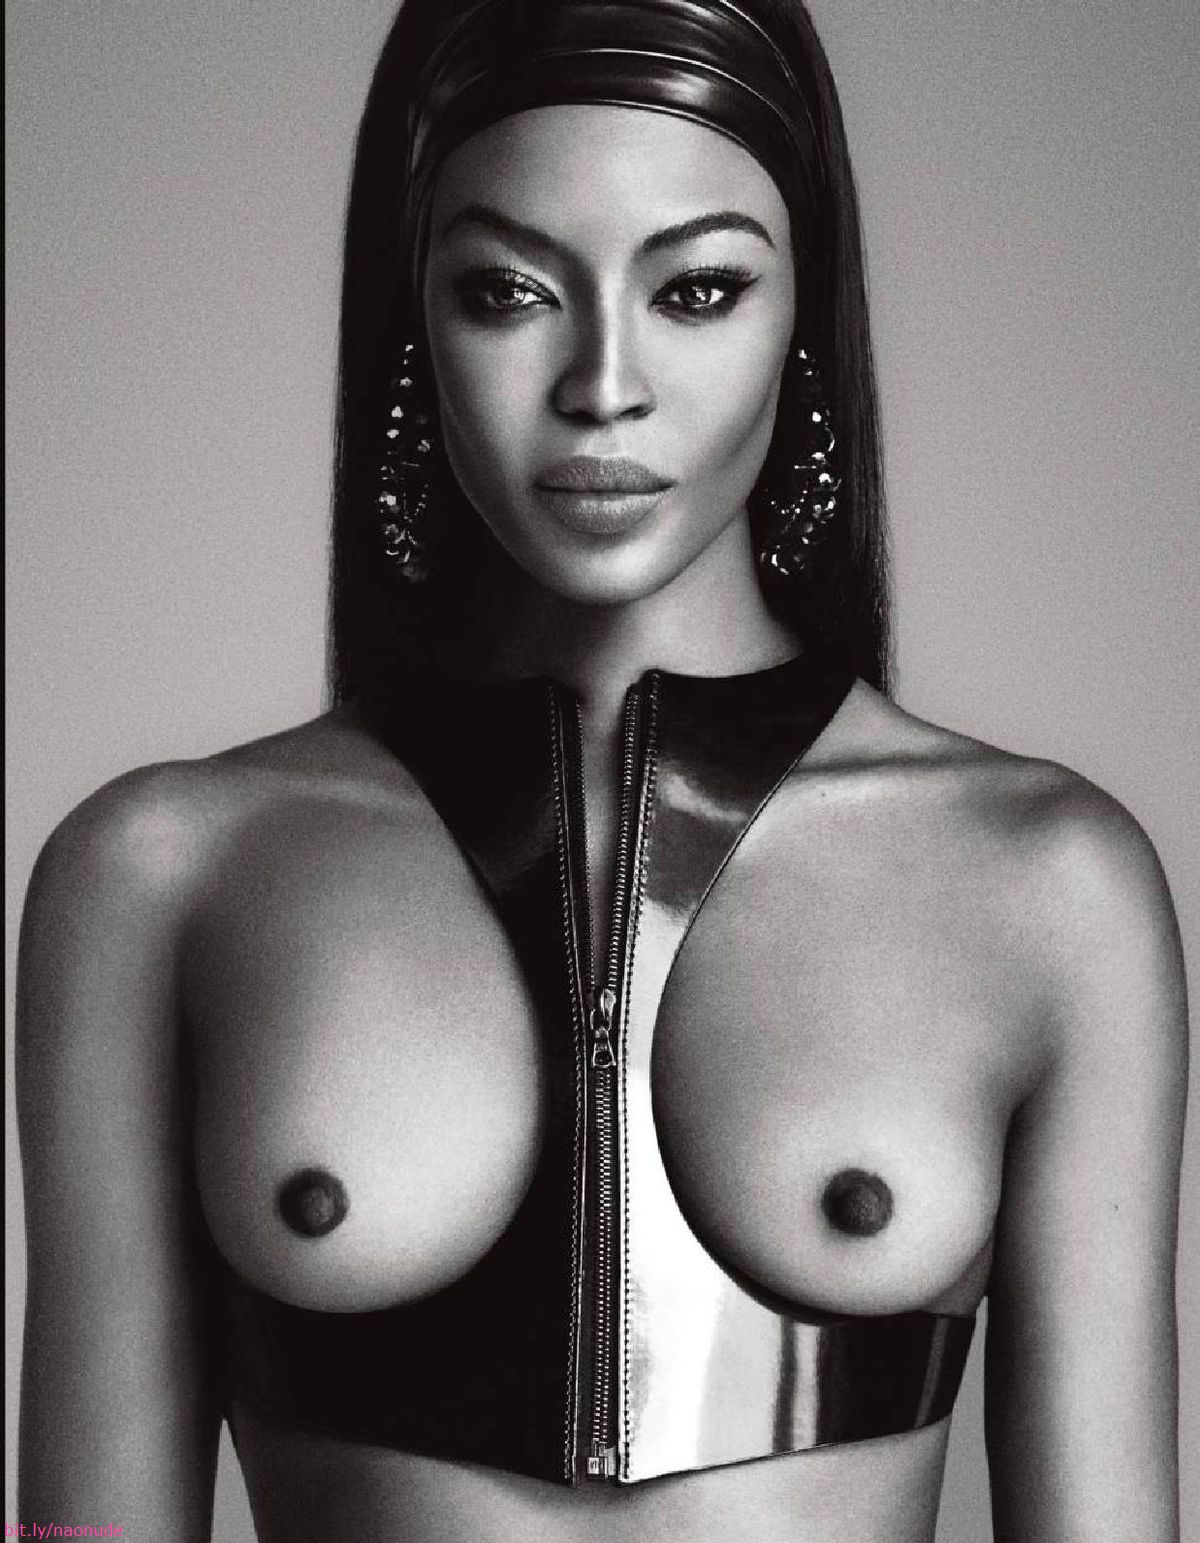 Naomi Campbell Nude - You’ll Get to See Her Bush (279 PICS) .